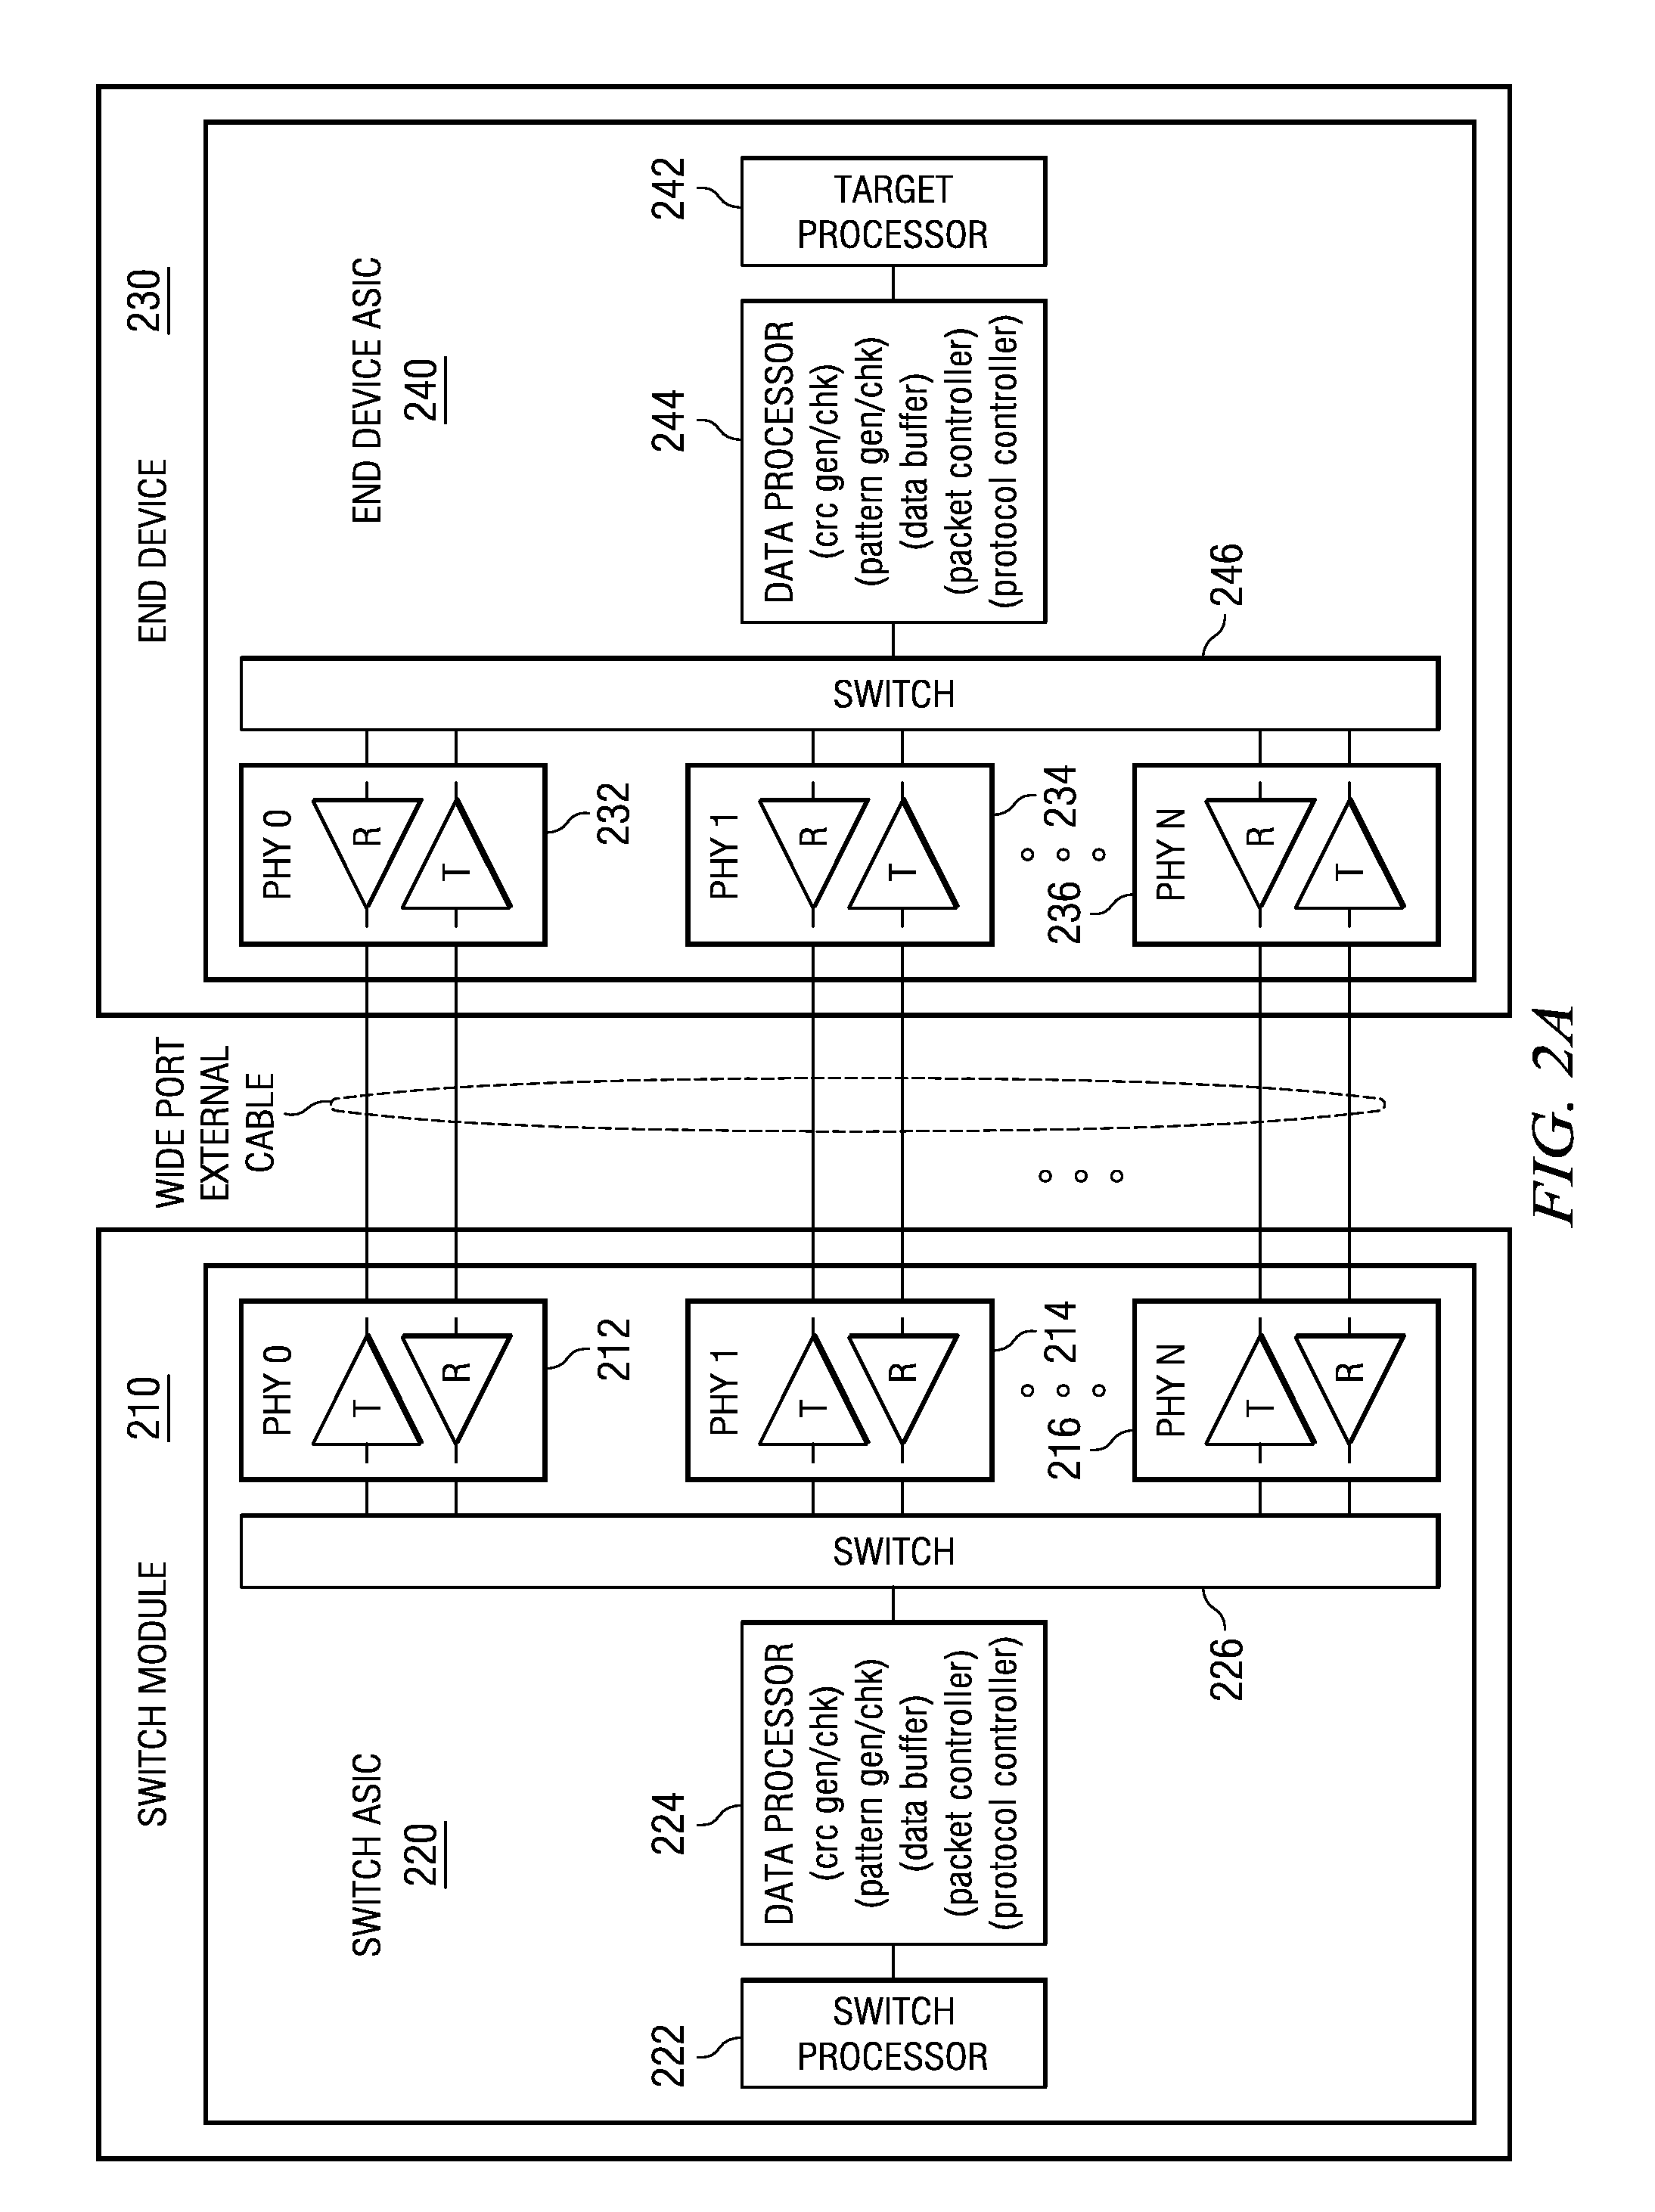 Method and Procedure for Detecting Cable Length in a Storage Subsystem with Wide Ports